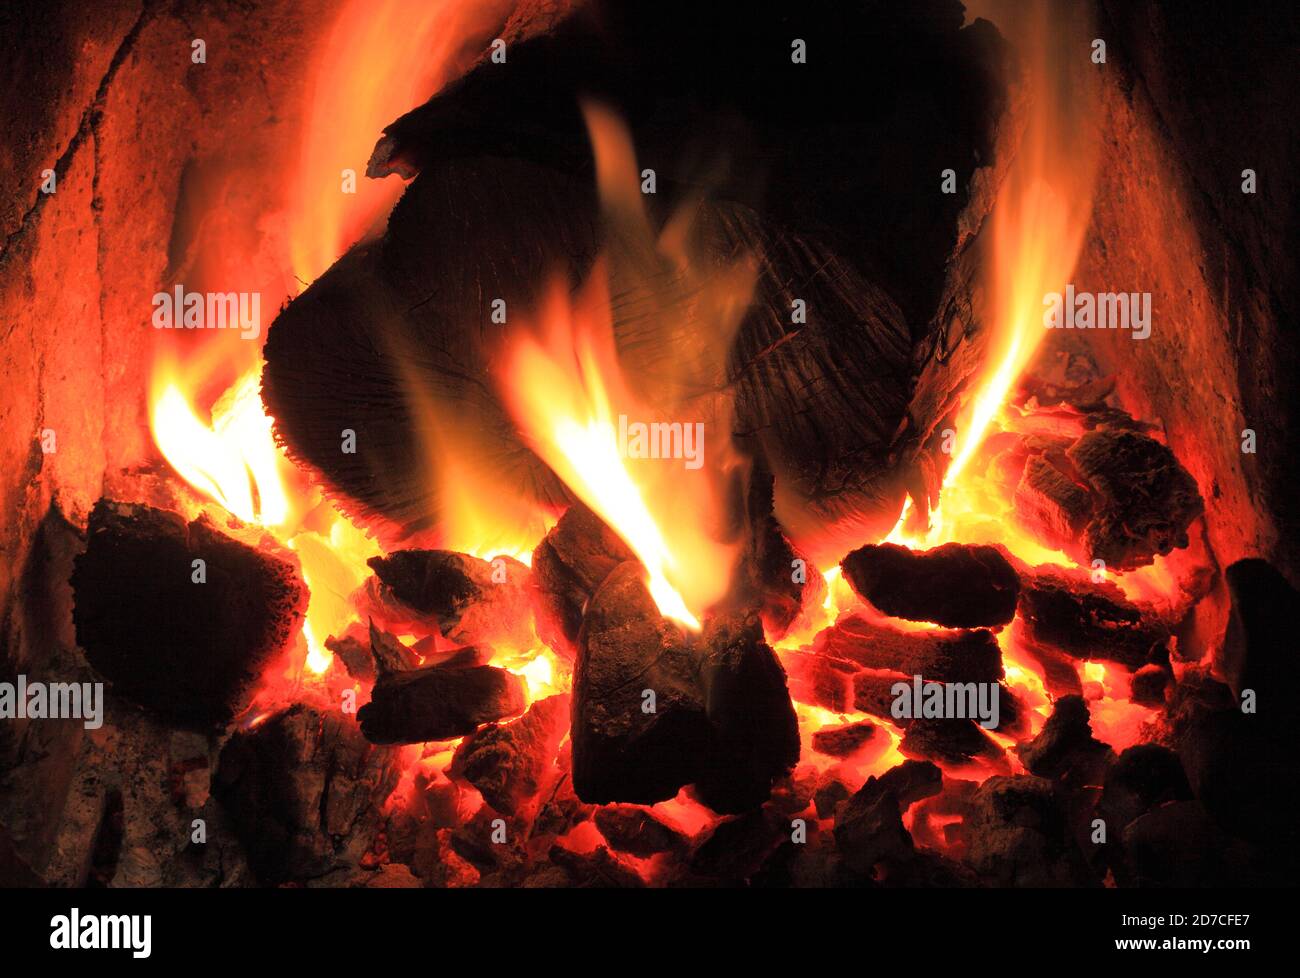 Coal and wood log, fire, domestic, hearth, burning, heat, warmth Stock Photo